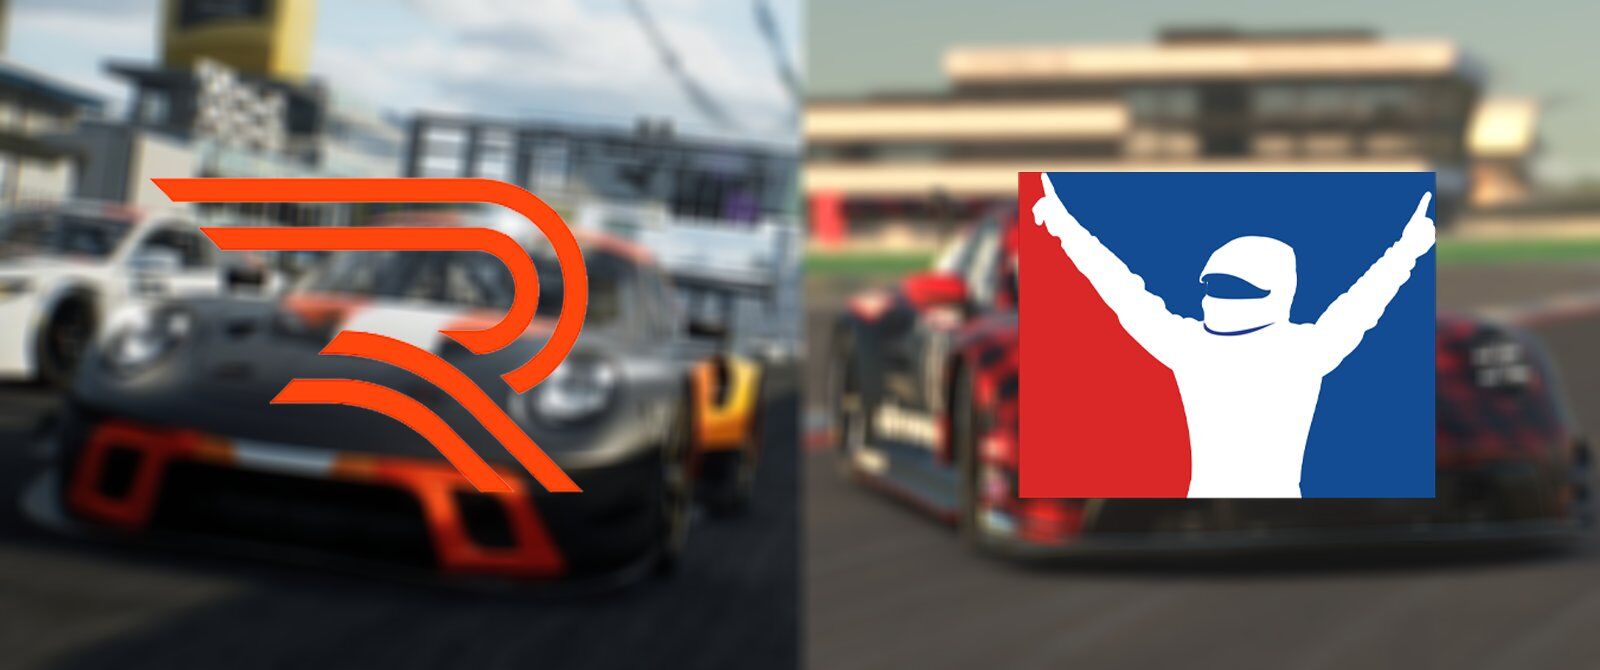 The Rennsport logo on the left and iRacing logo on the right, with two blurry pictures in the background of each corresponding logo's placement of a Porsche 911 GT3 R 992 on Rennsport and iRacing.